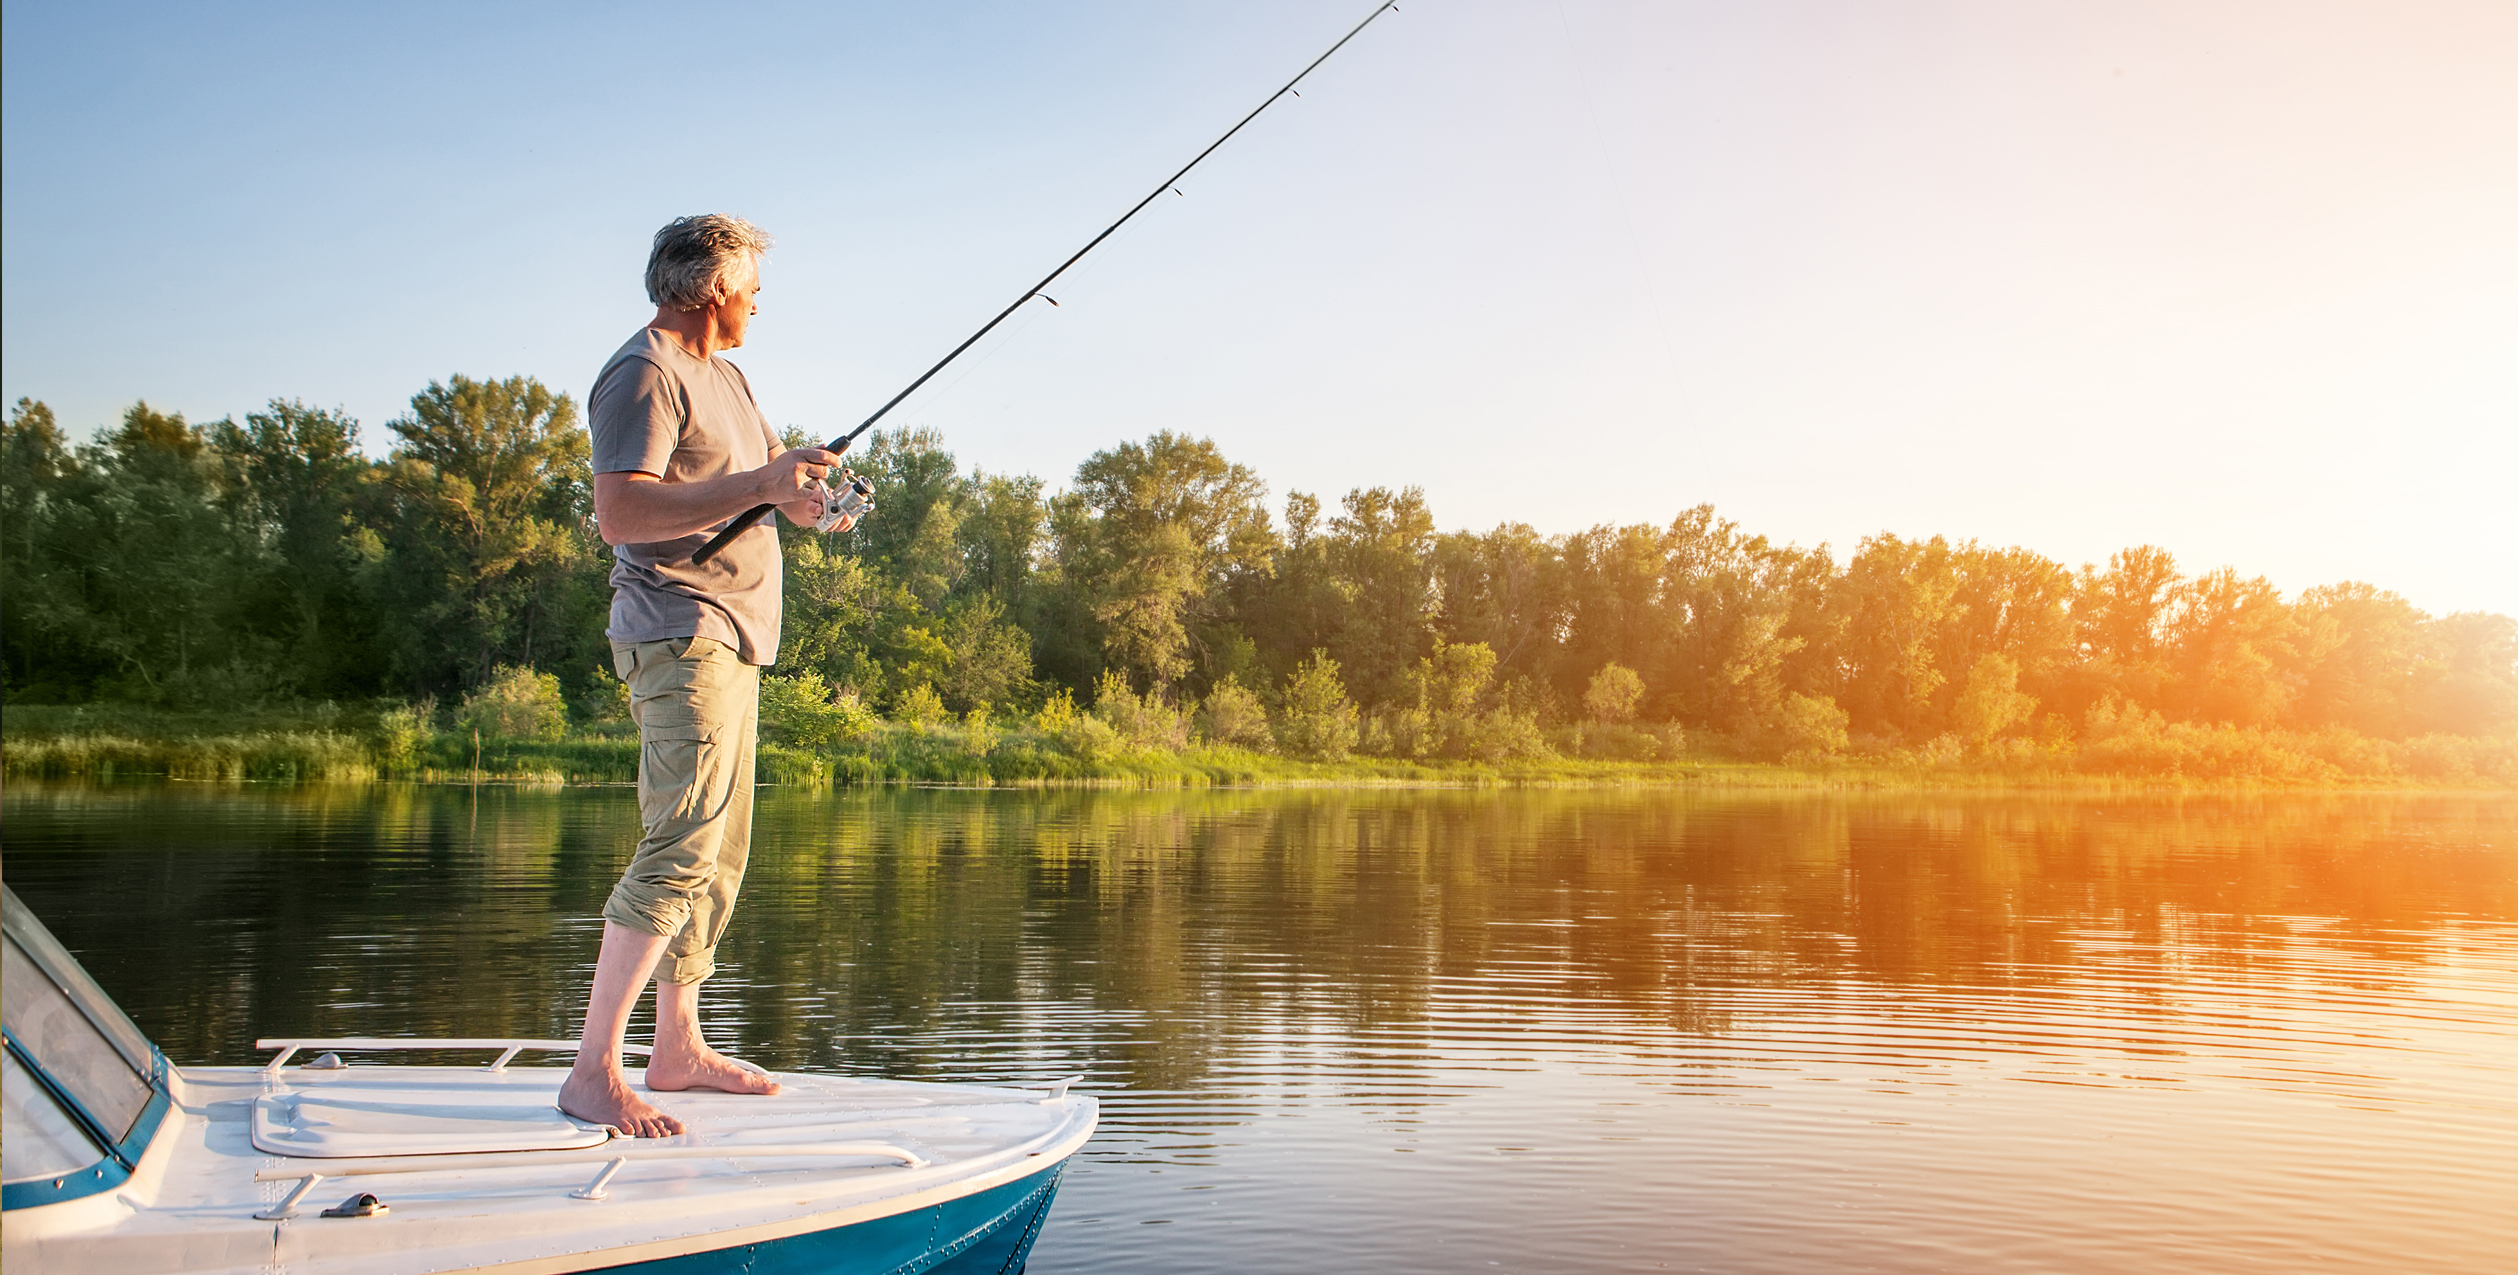 Fishing Forecast: Is it Best to go Fishing Before a Storm or After?